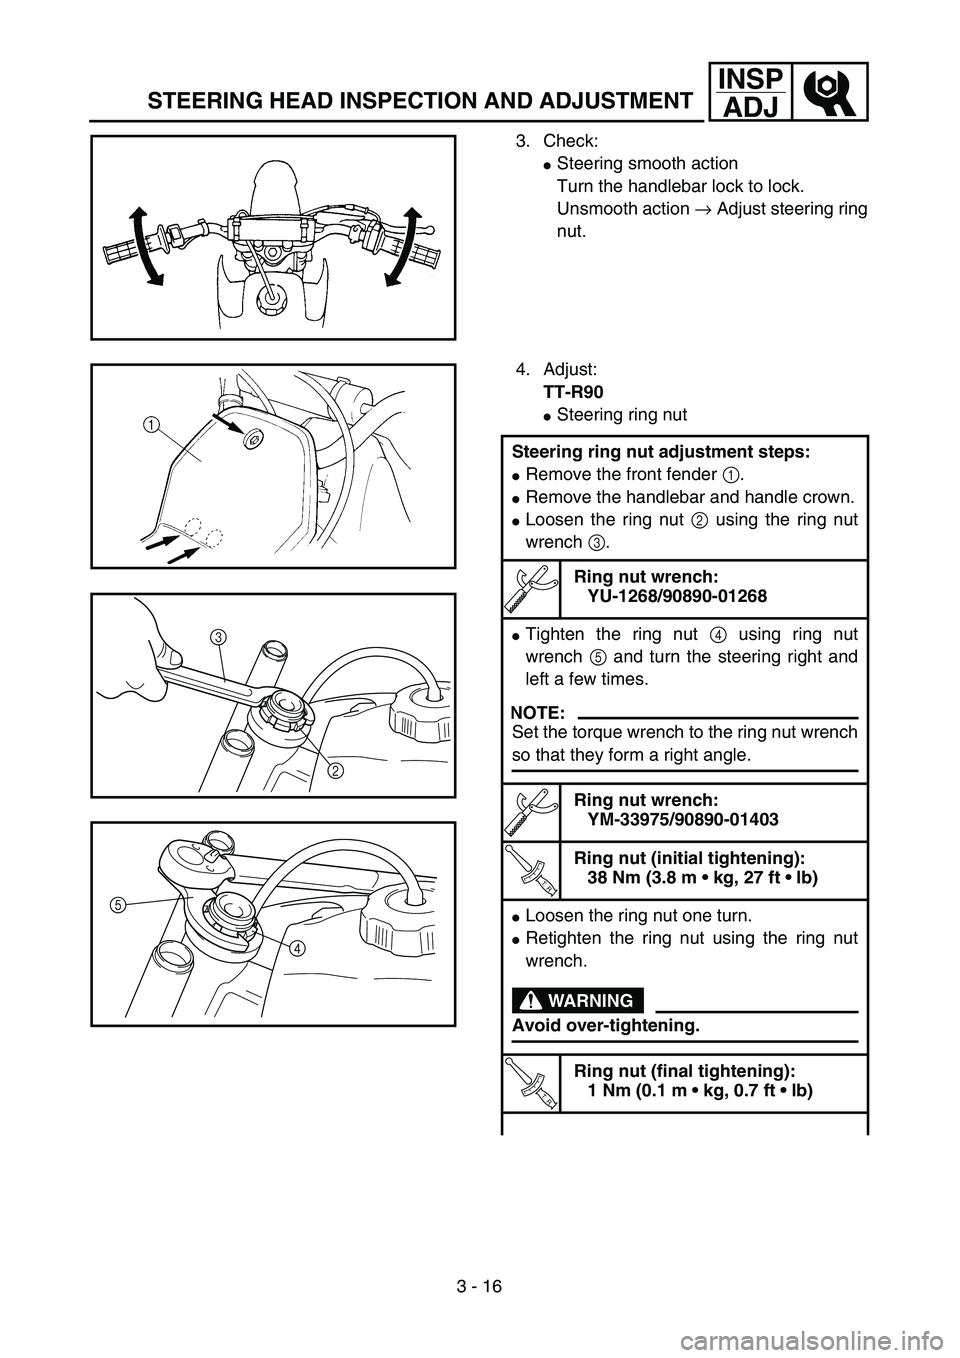 YAMAHA TTR90 2004  Owners Manual 3 - 16
INSP
ADJ
STEERING HEAD INSPECTION AND ADJUSTMENT
3. Check:
Steering smooth action
Turn the handlebar lock to lock.
Unsmooth action → Adjust steering ring
nut.
4. Adjust:
TT-R90
Steering rin